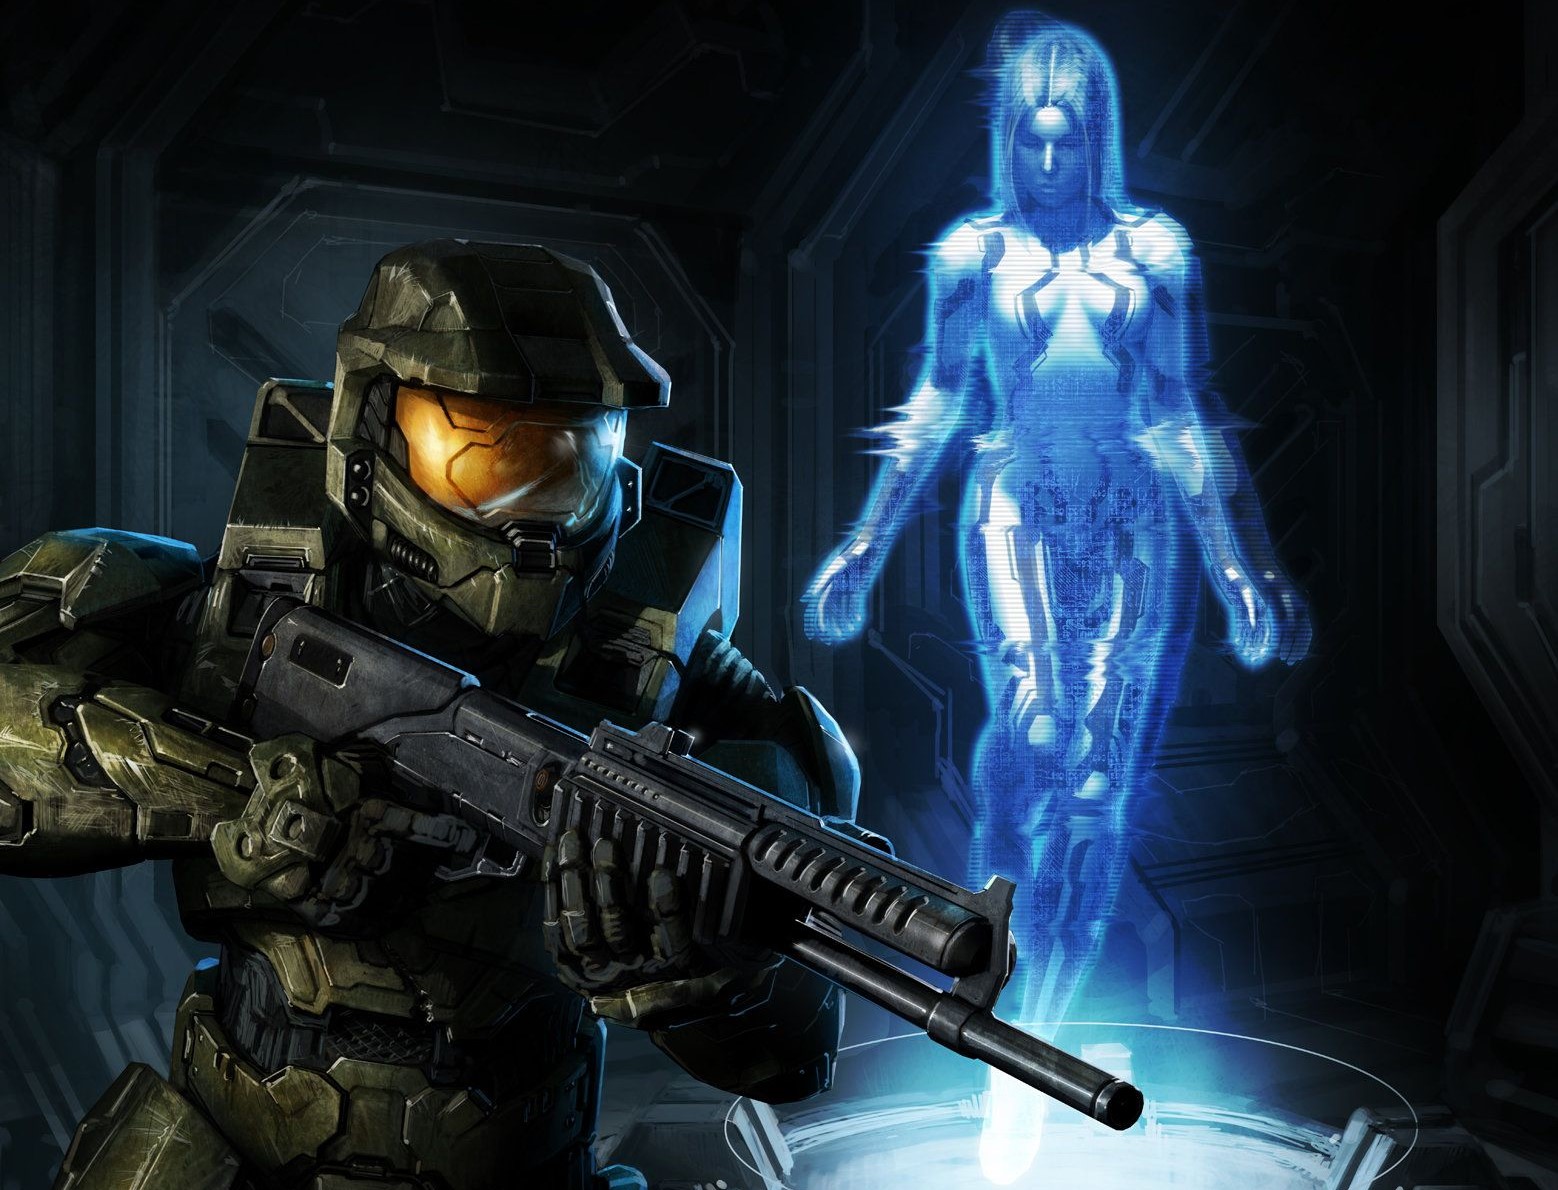 halo 3 release date